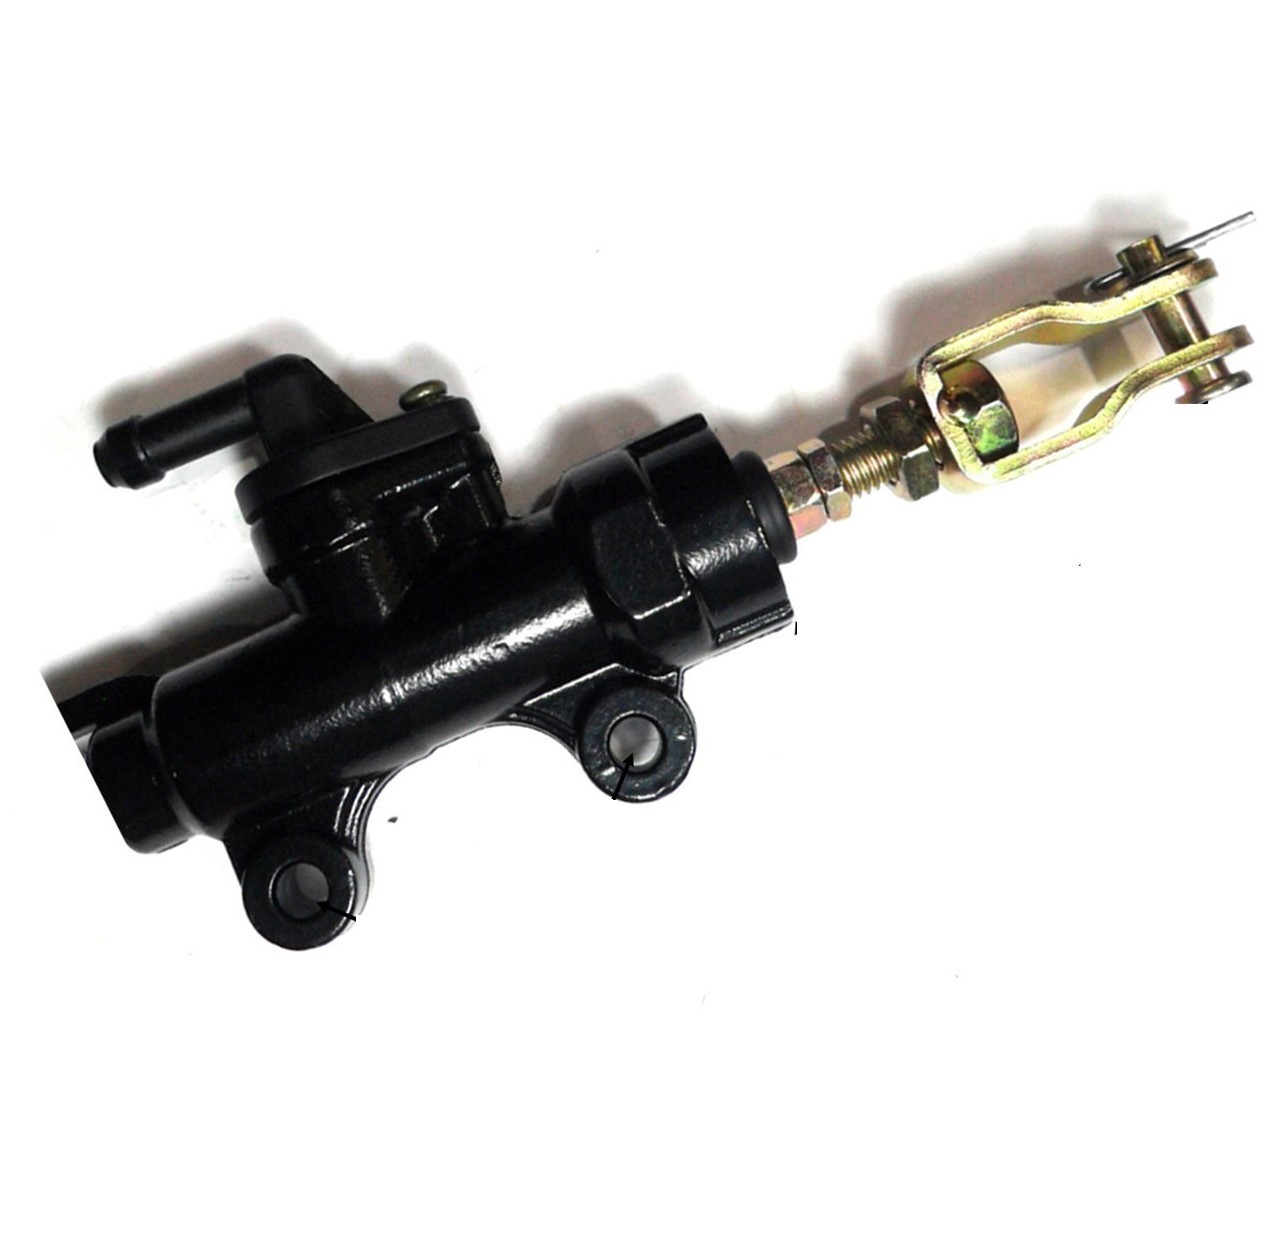 Brake Master Cylinder Fits Coleman CK100, Motovox, GK80 + other small GoKarts Bolts C/C=45mm, Rod from Body to Pin = 52mm